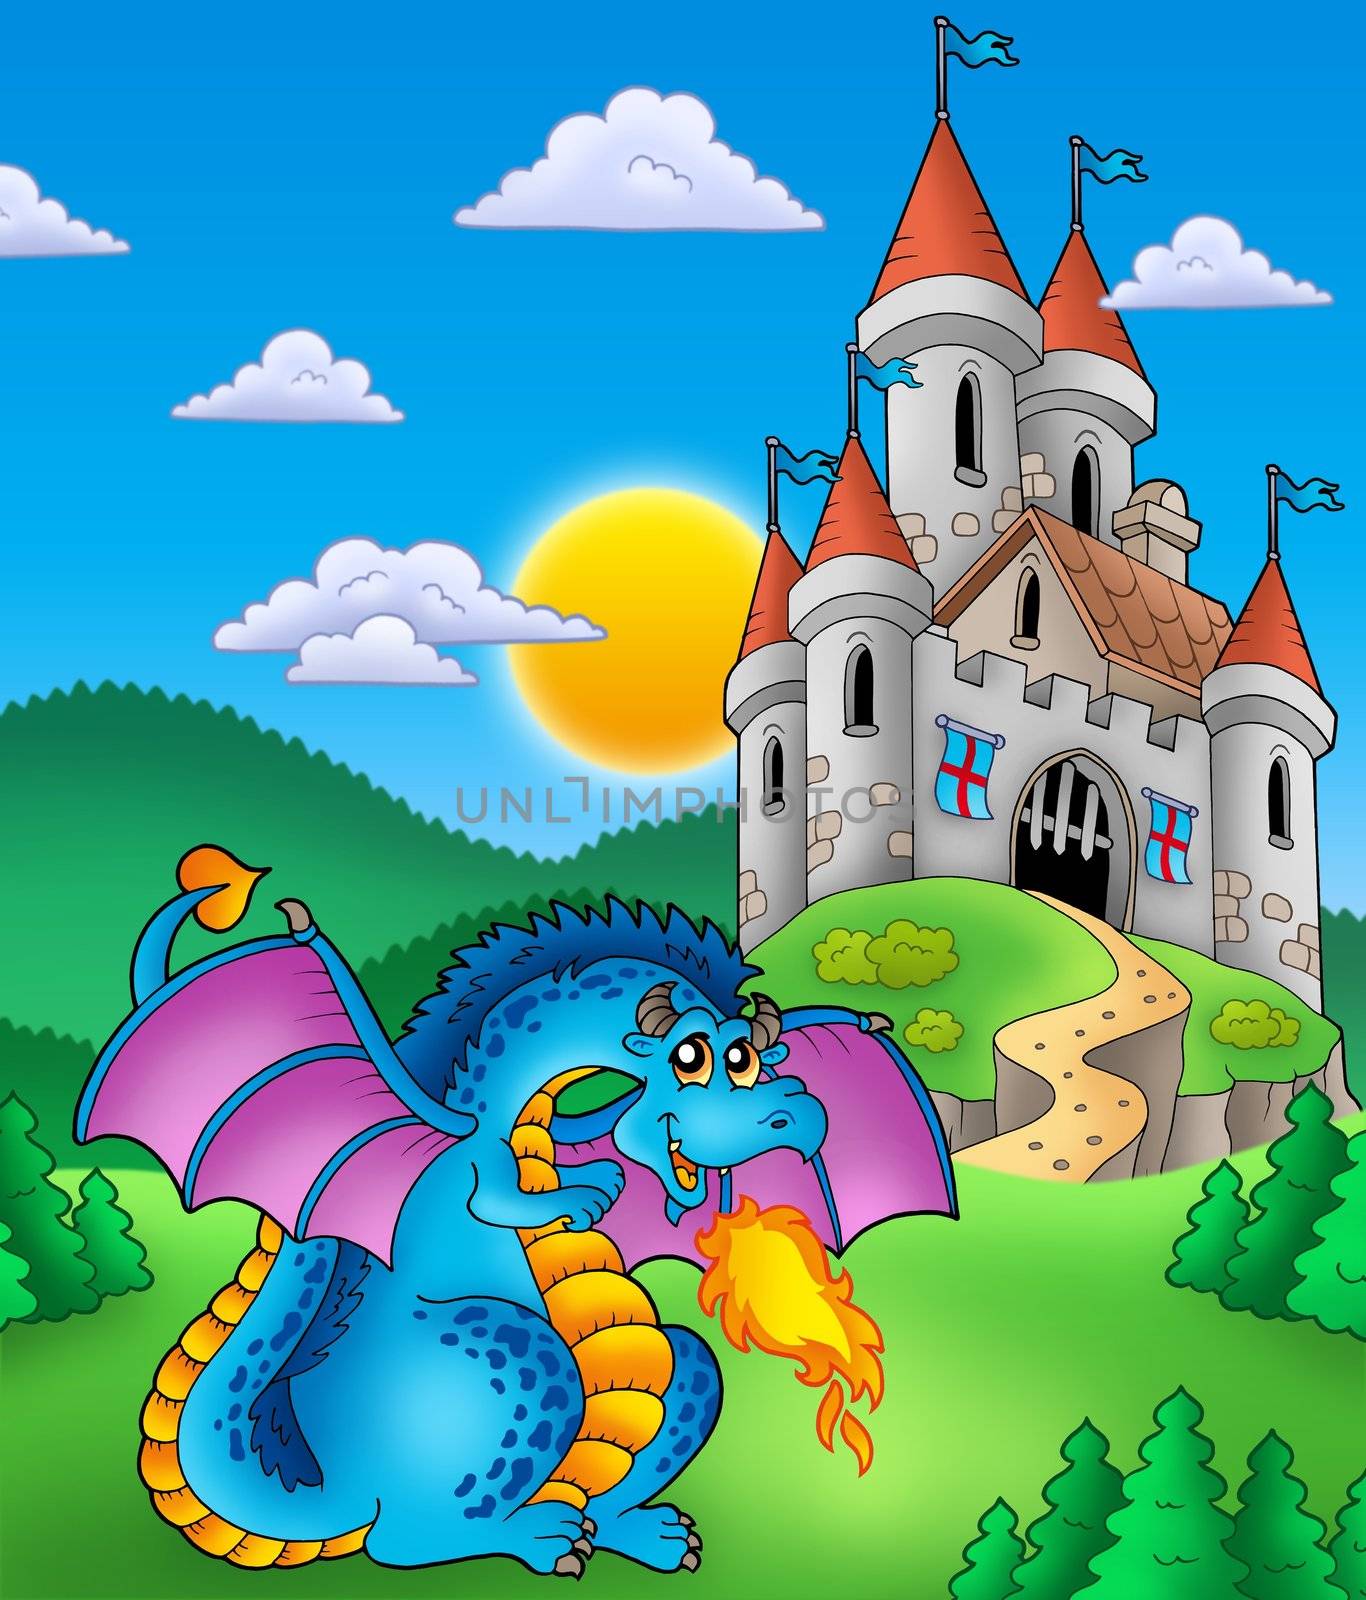 Big blue dragon with medieval castle by clairev